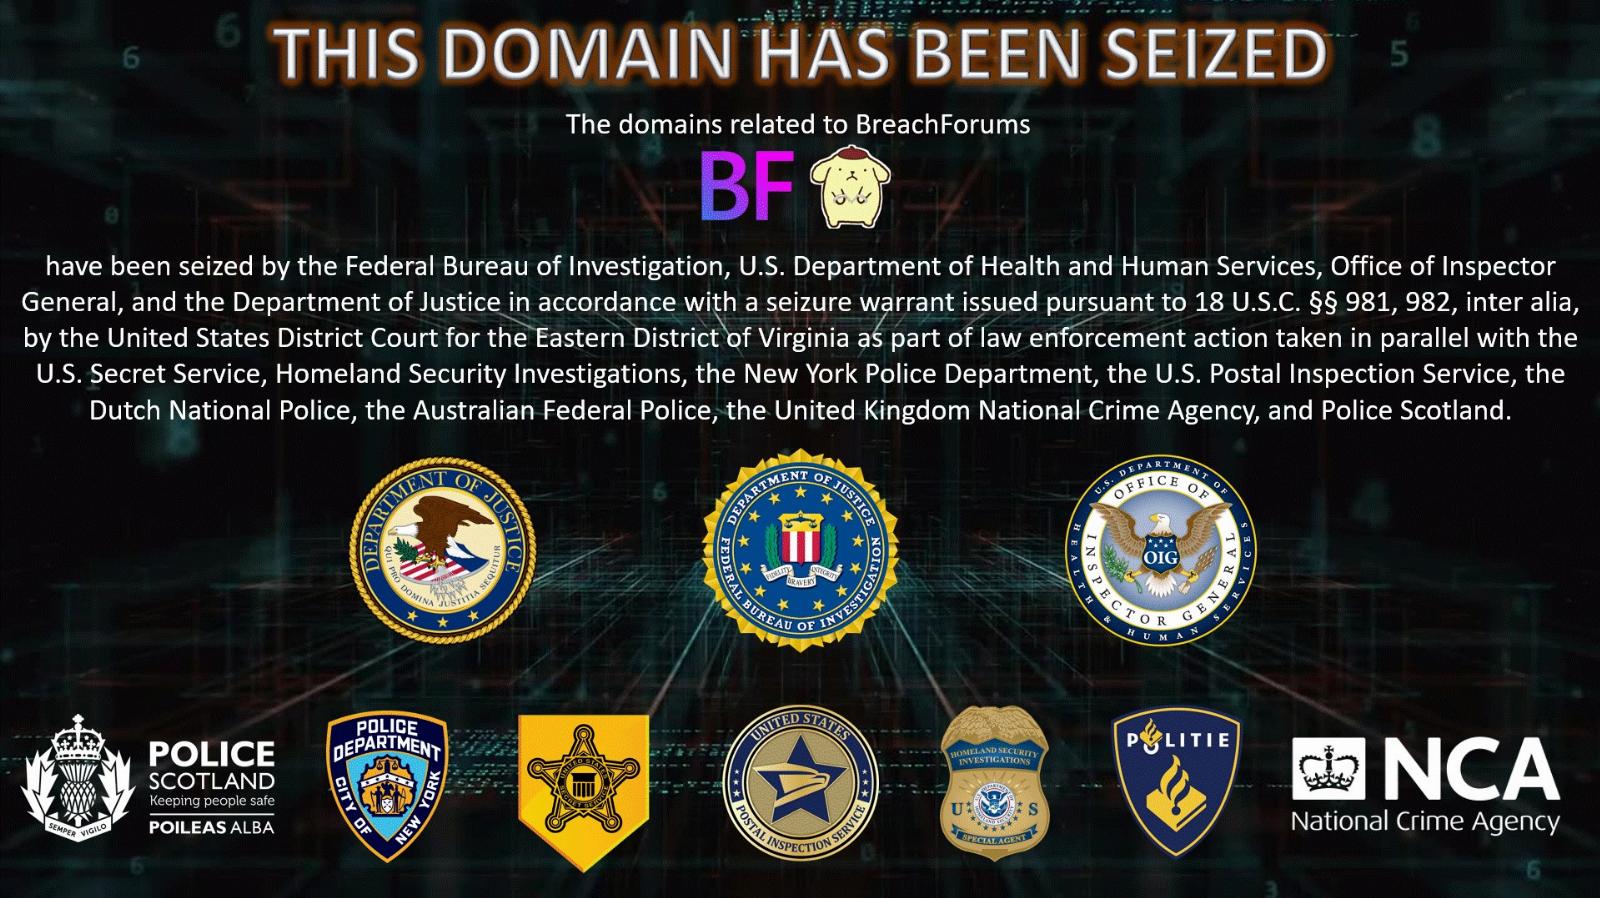 Feds seize notorious and shuttered hacking site BreachForums